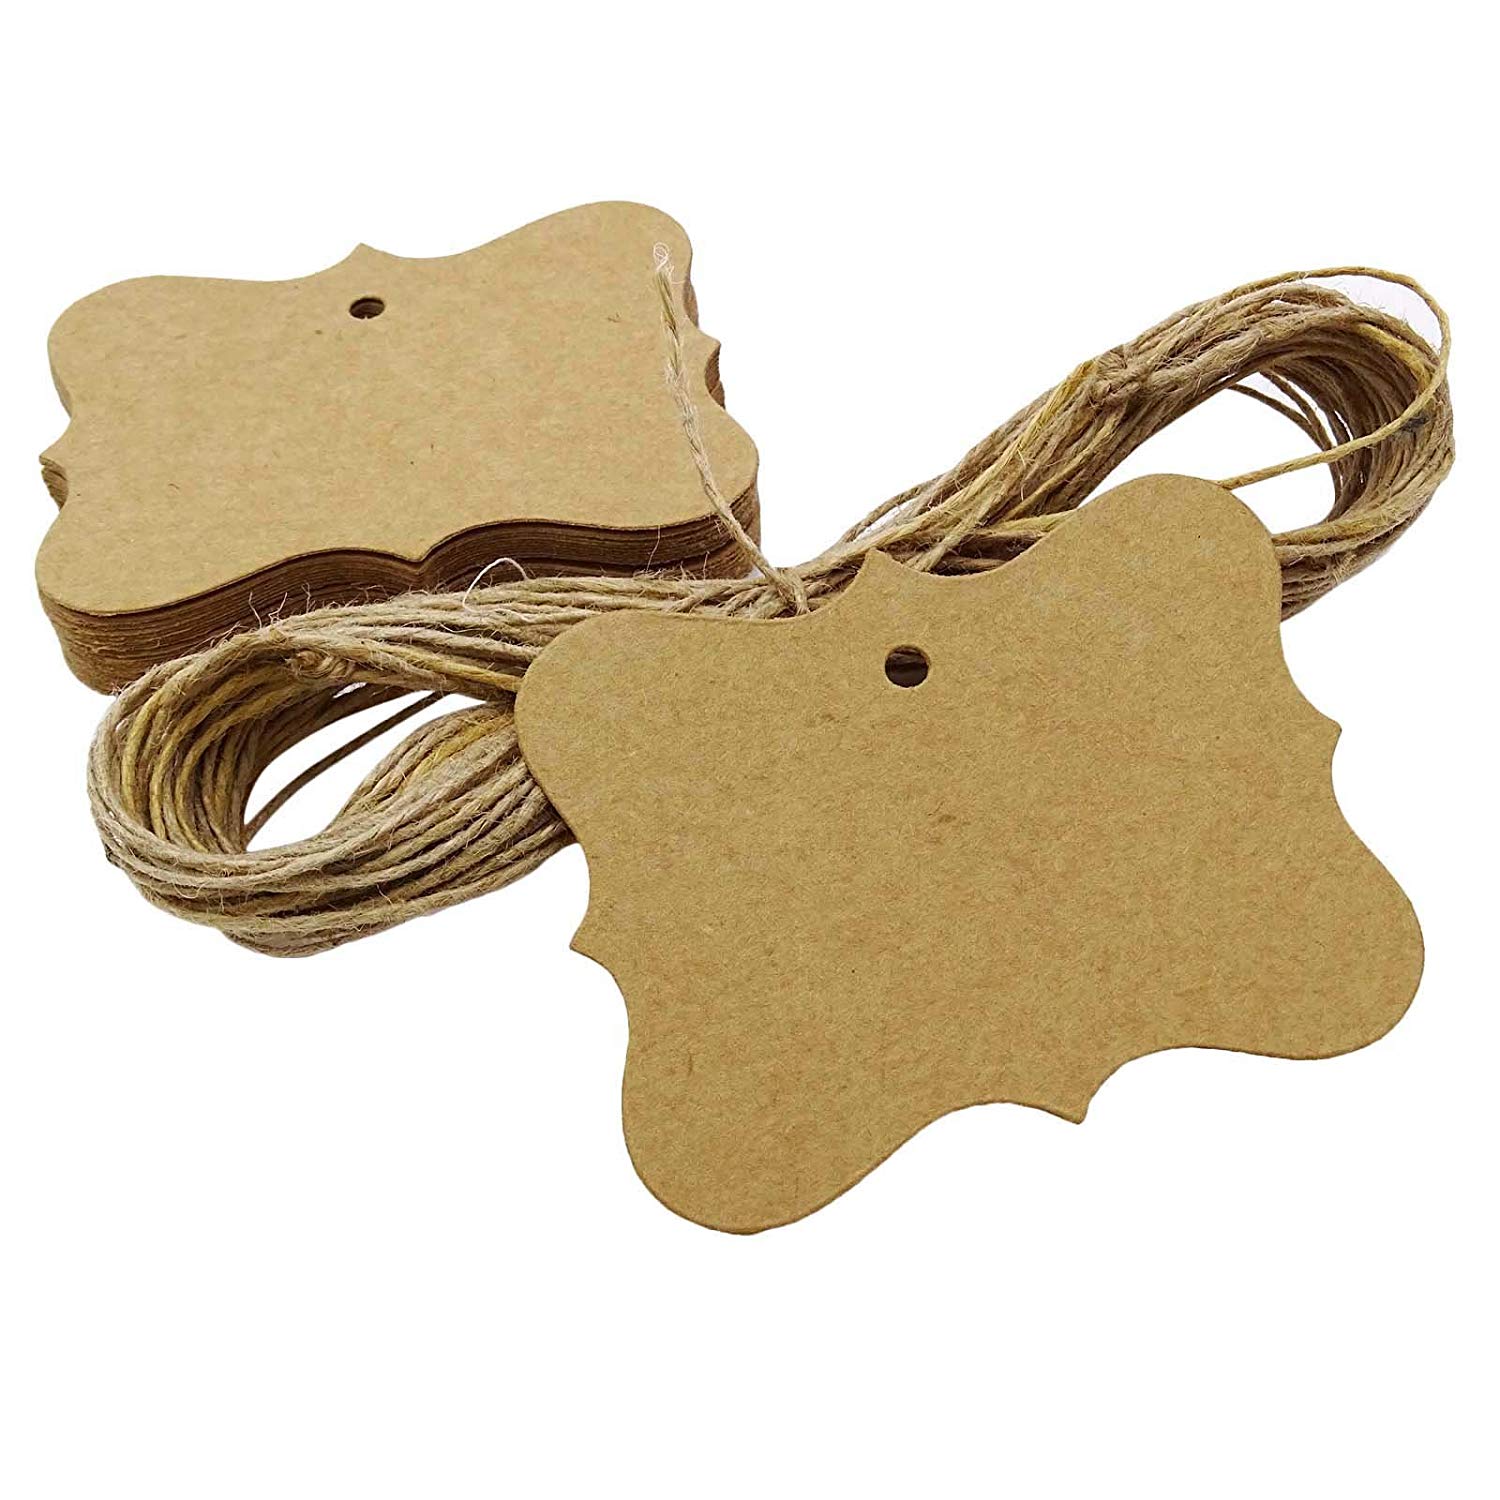 50 PACK OF BROWN KRAFT WEDDING BONBONNIERE BIRTHDAY PARTY GIFT PAPER TAG TAGS 